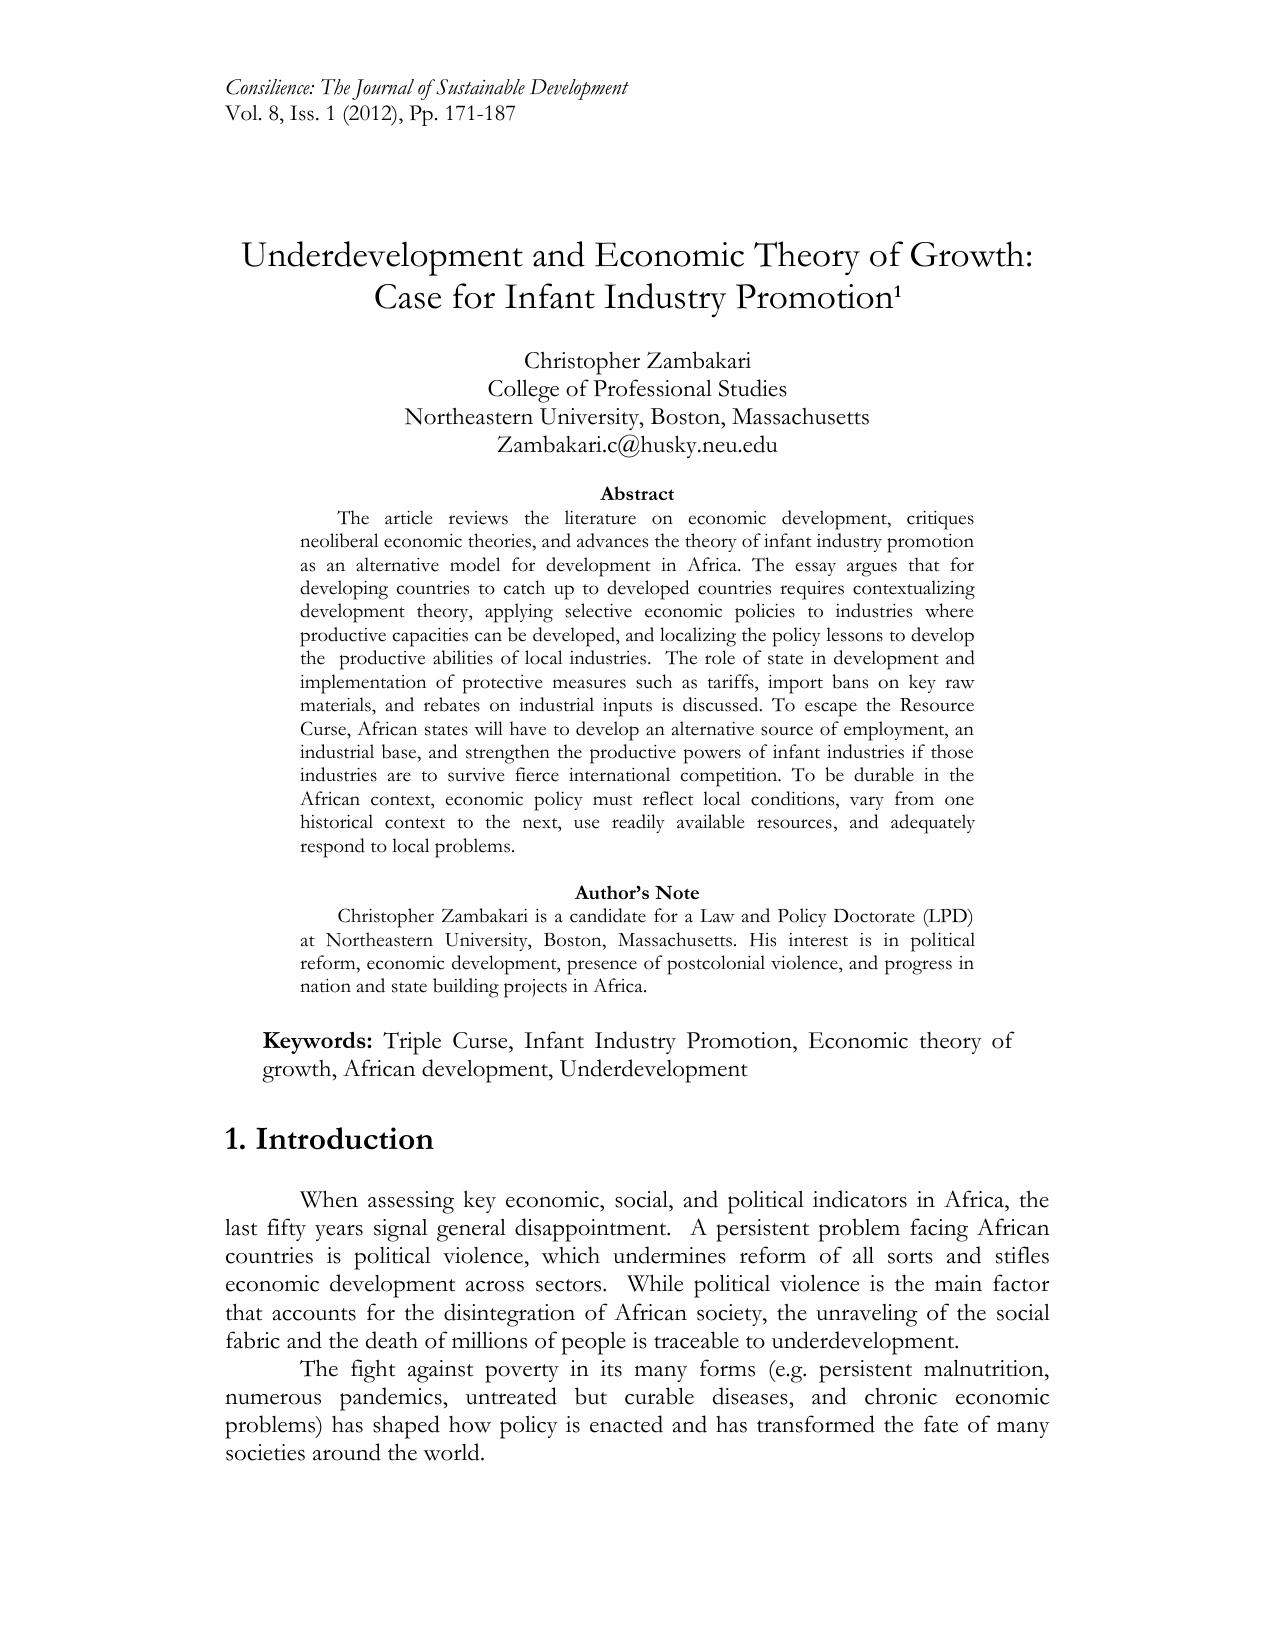 Underdevelopment and Economic Theory of Growth